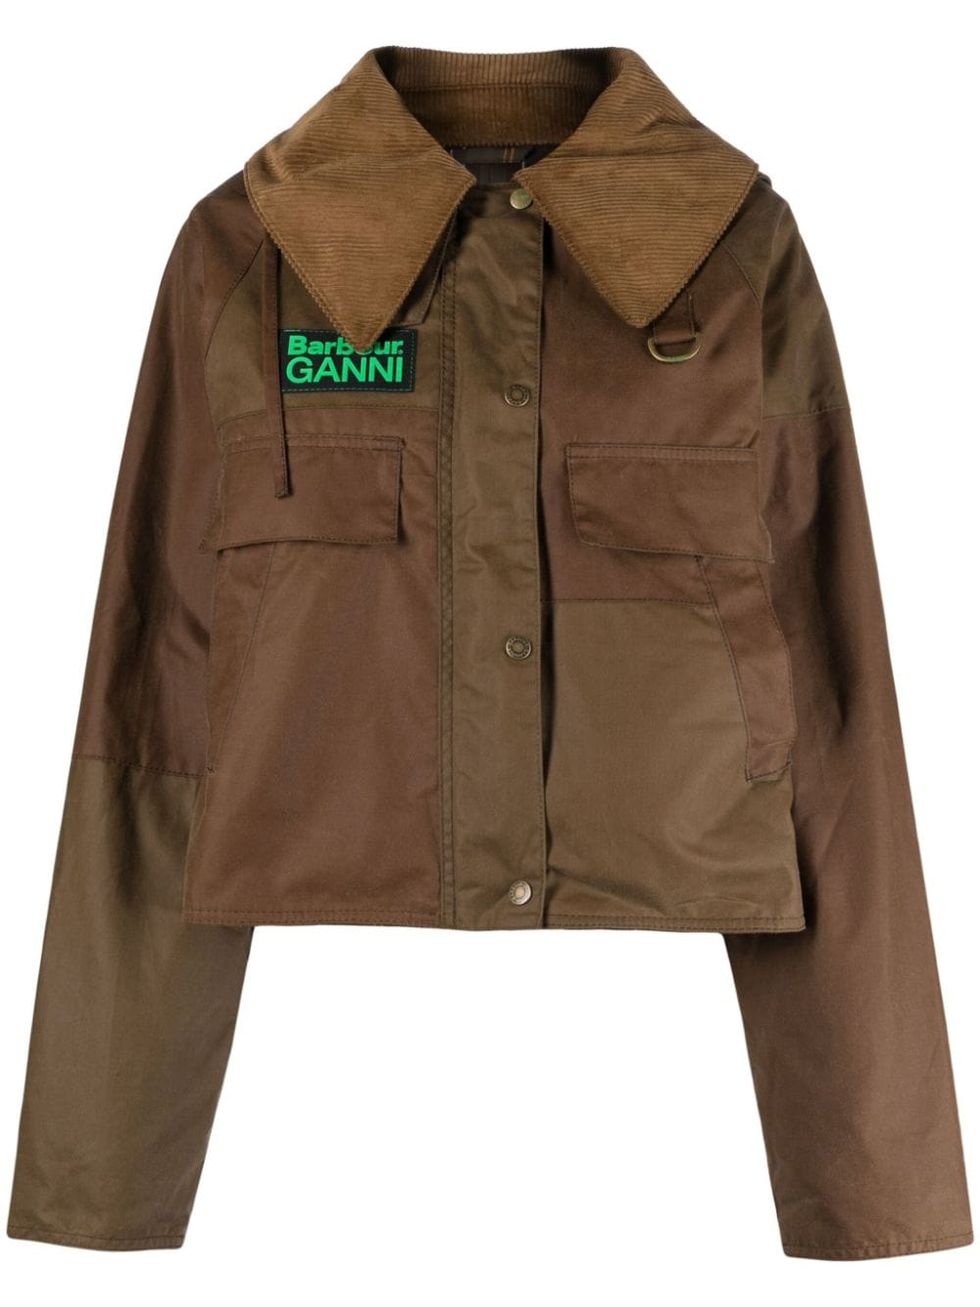 a brown jacket with green text